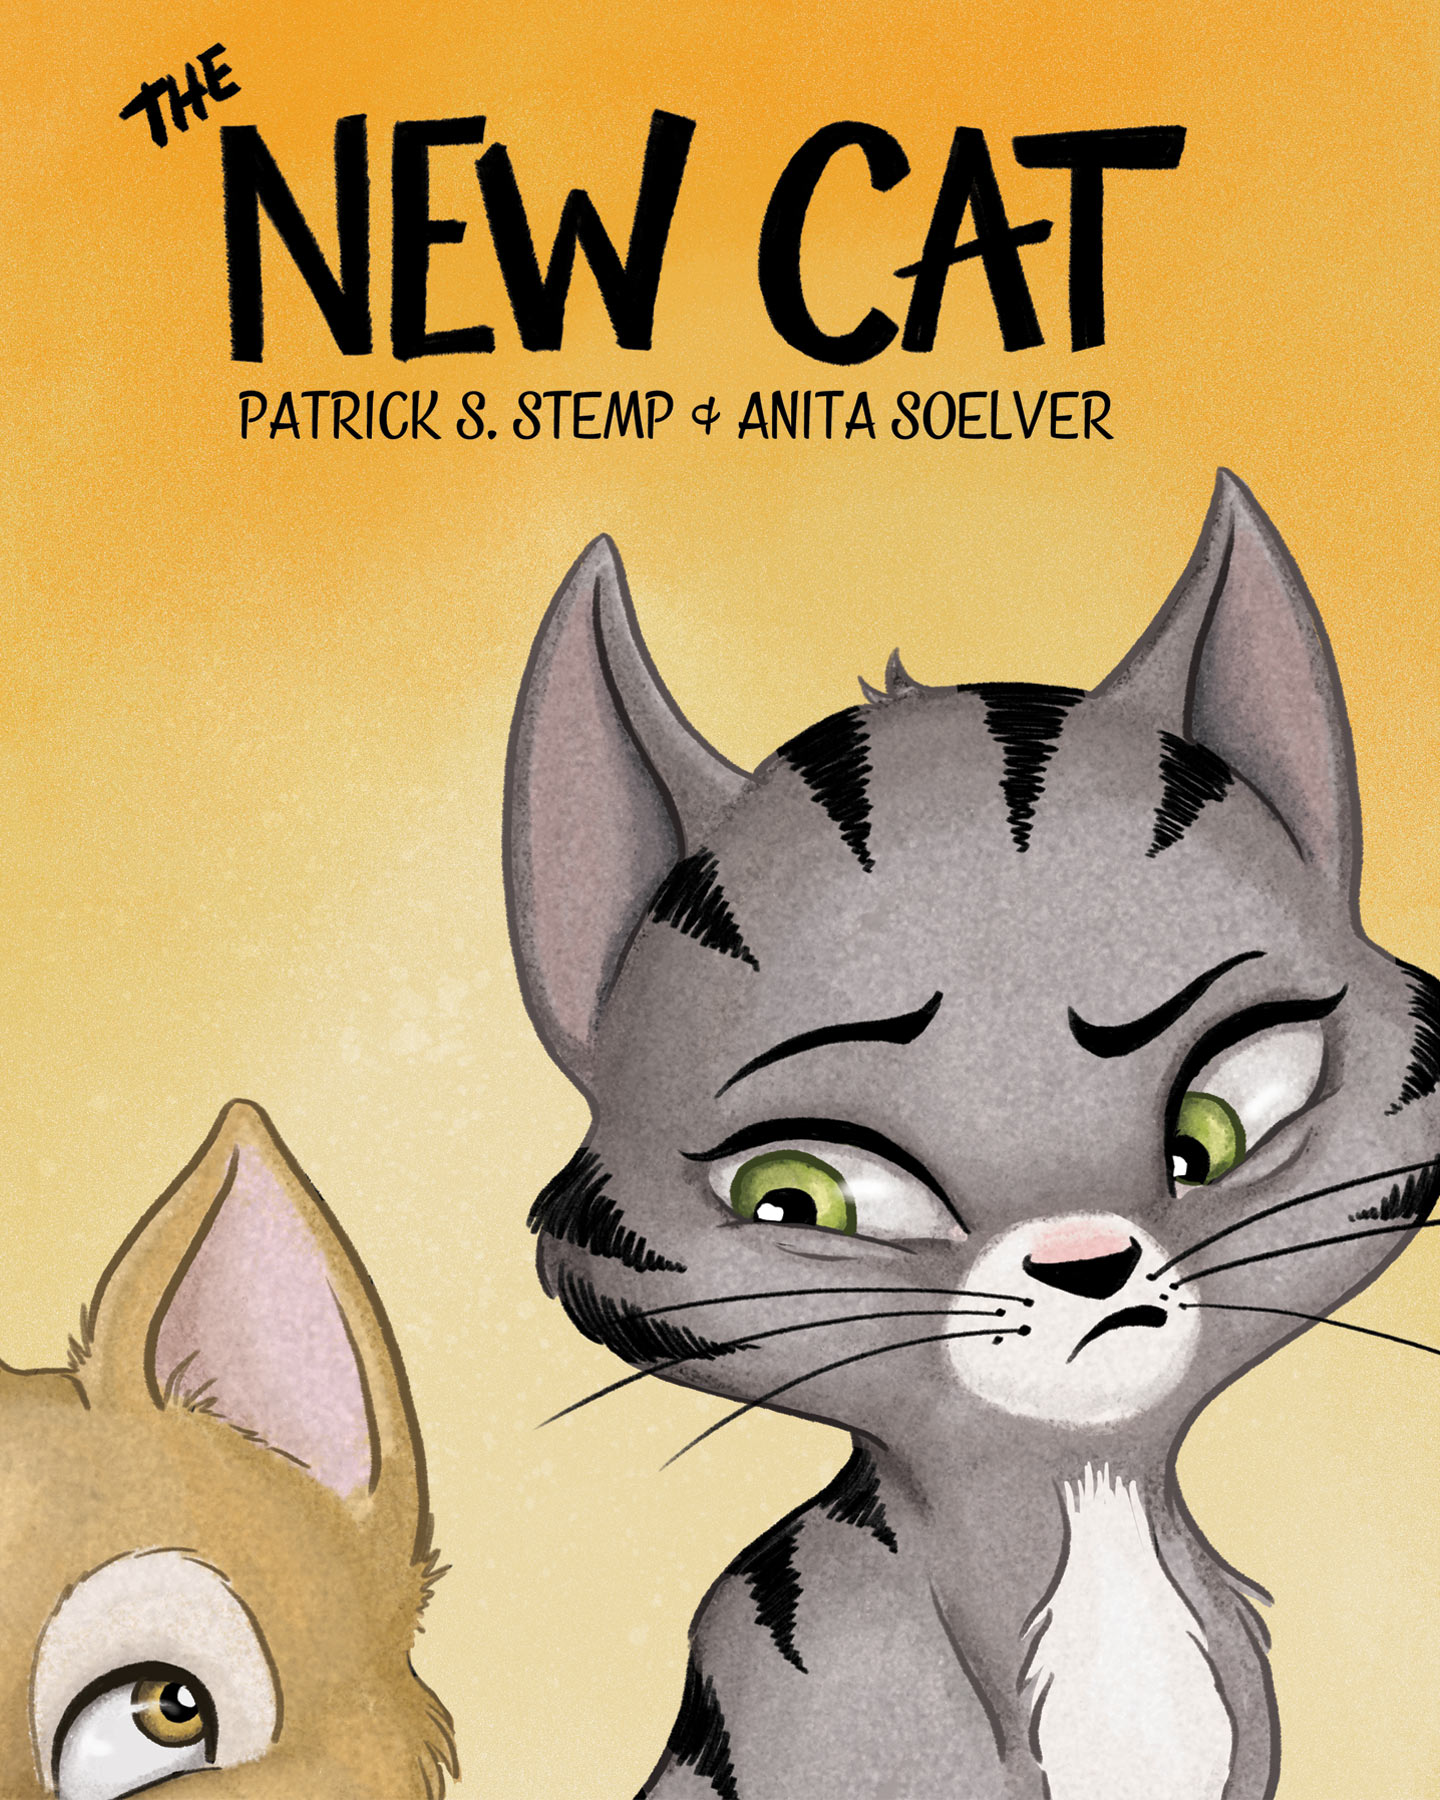 The New Cat - a children's book by Patrick Stemp & Anita Soelver